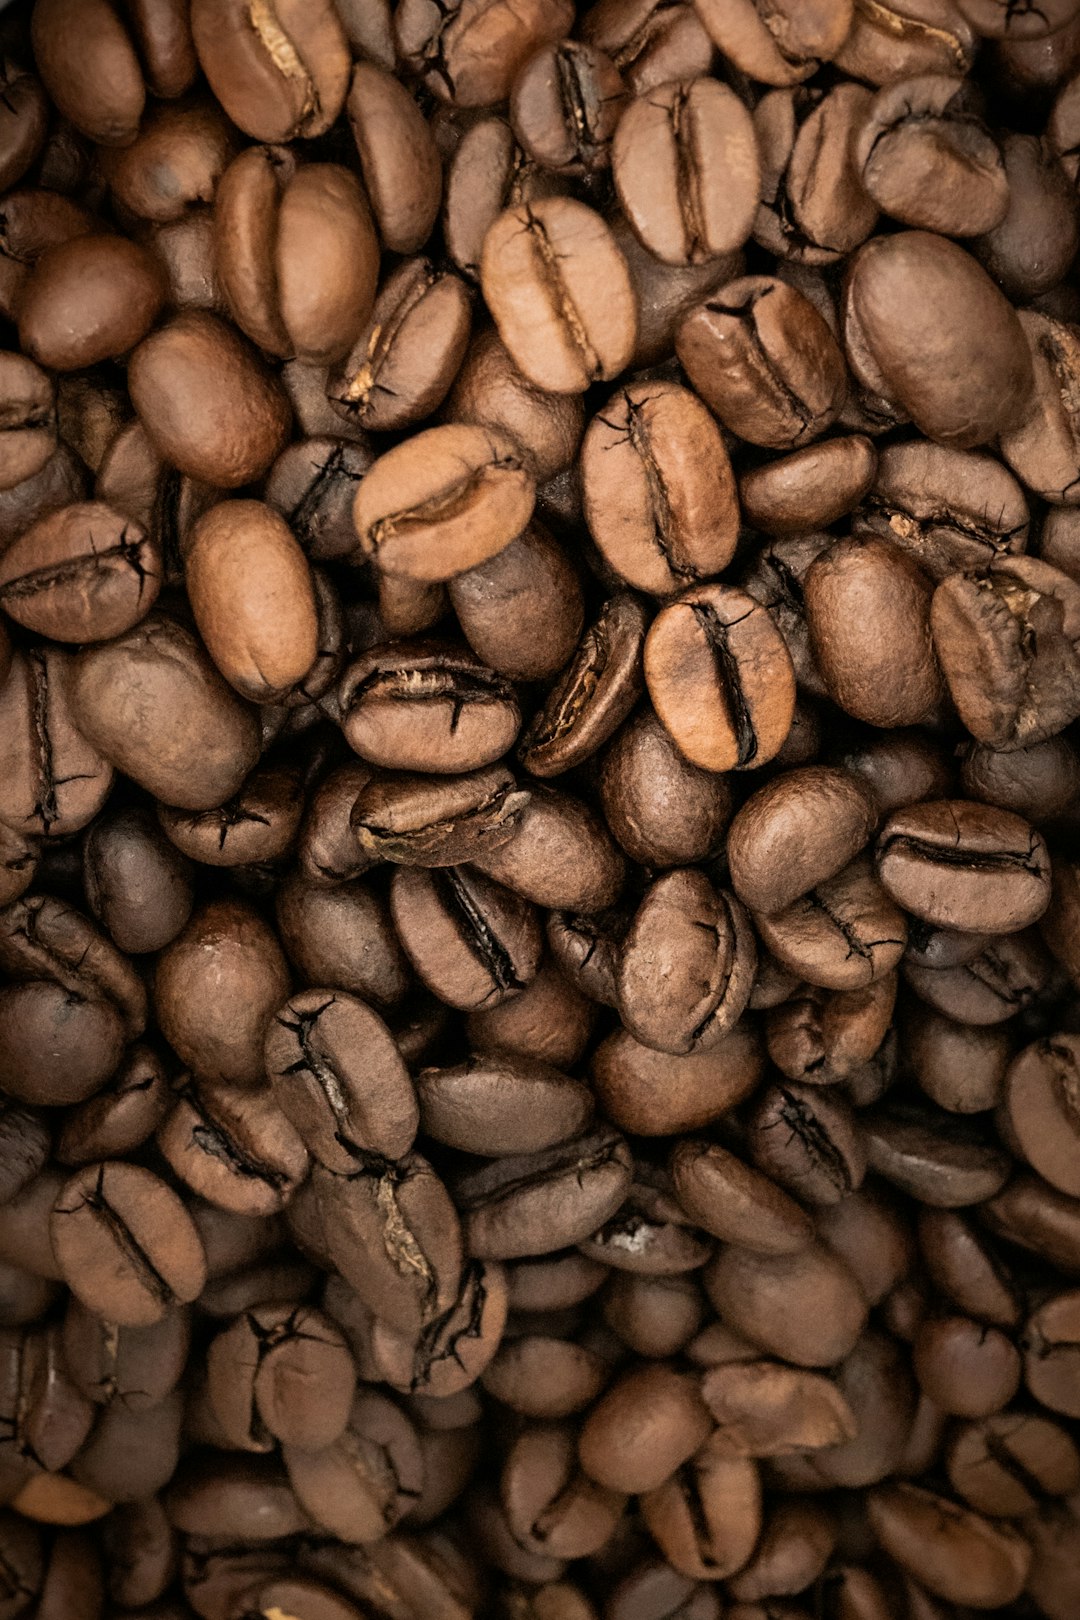 The Health Benefits of Gourmet Coffee